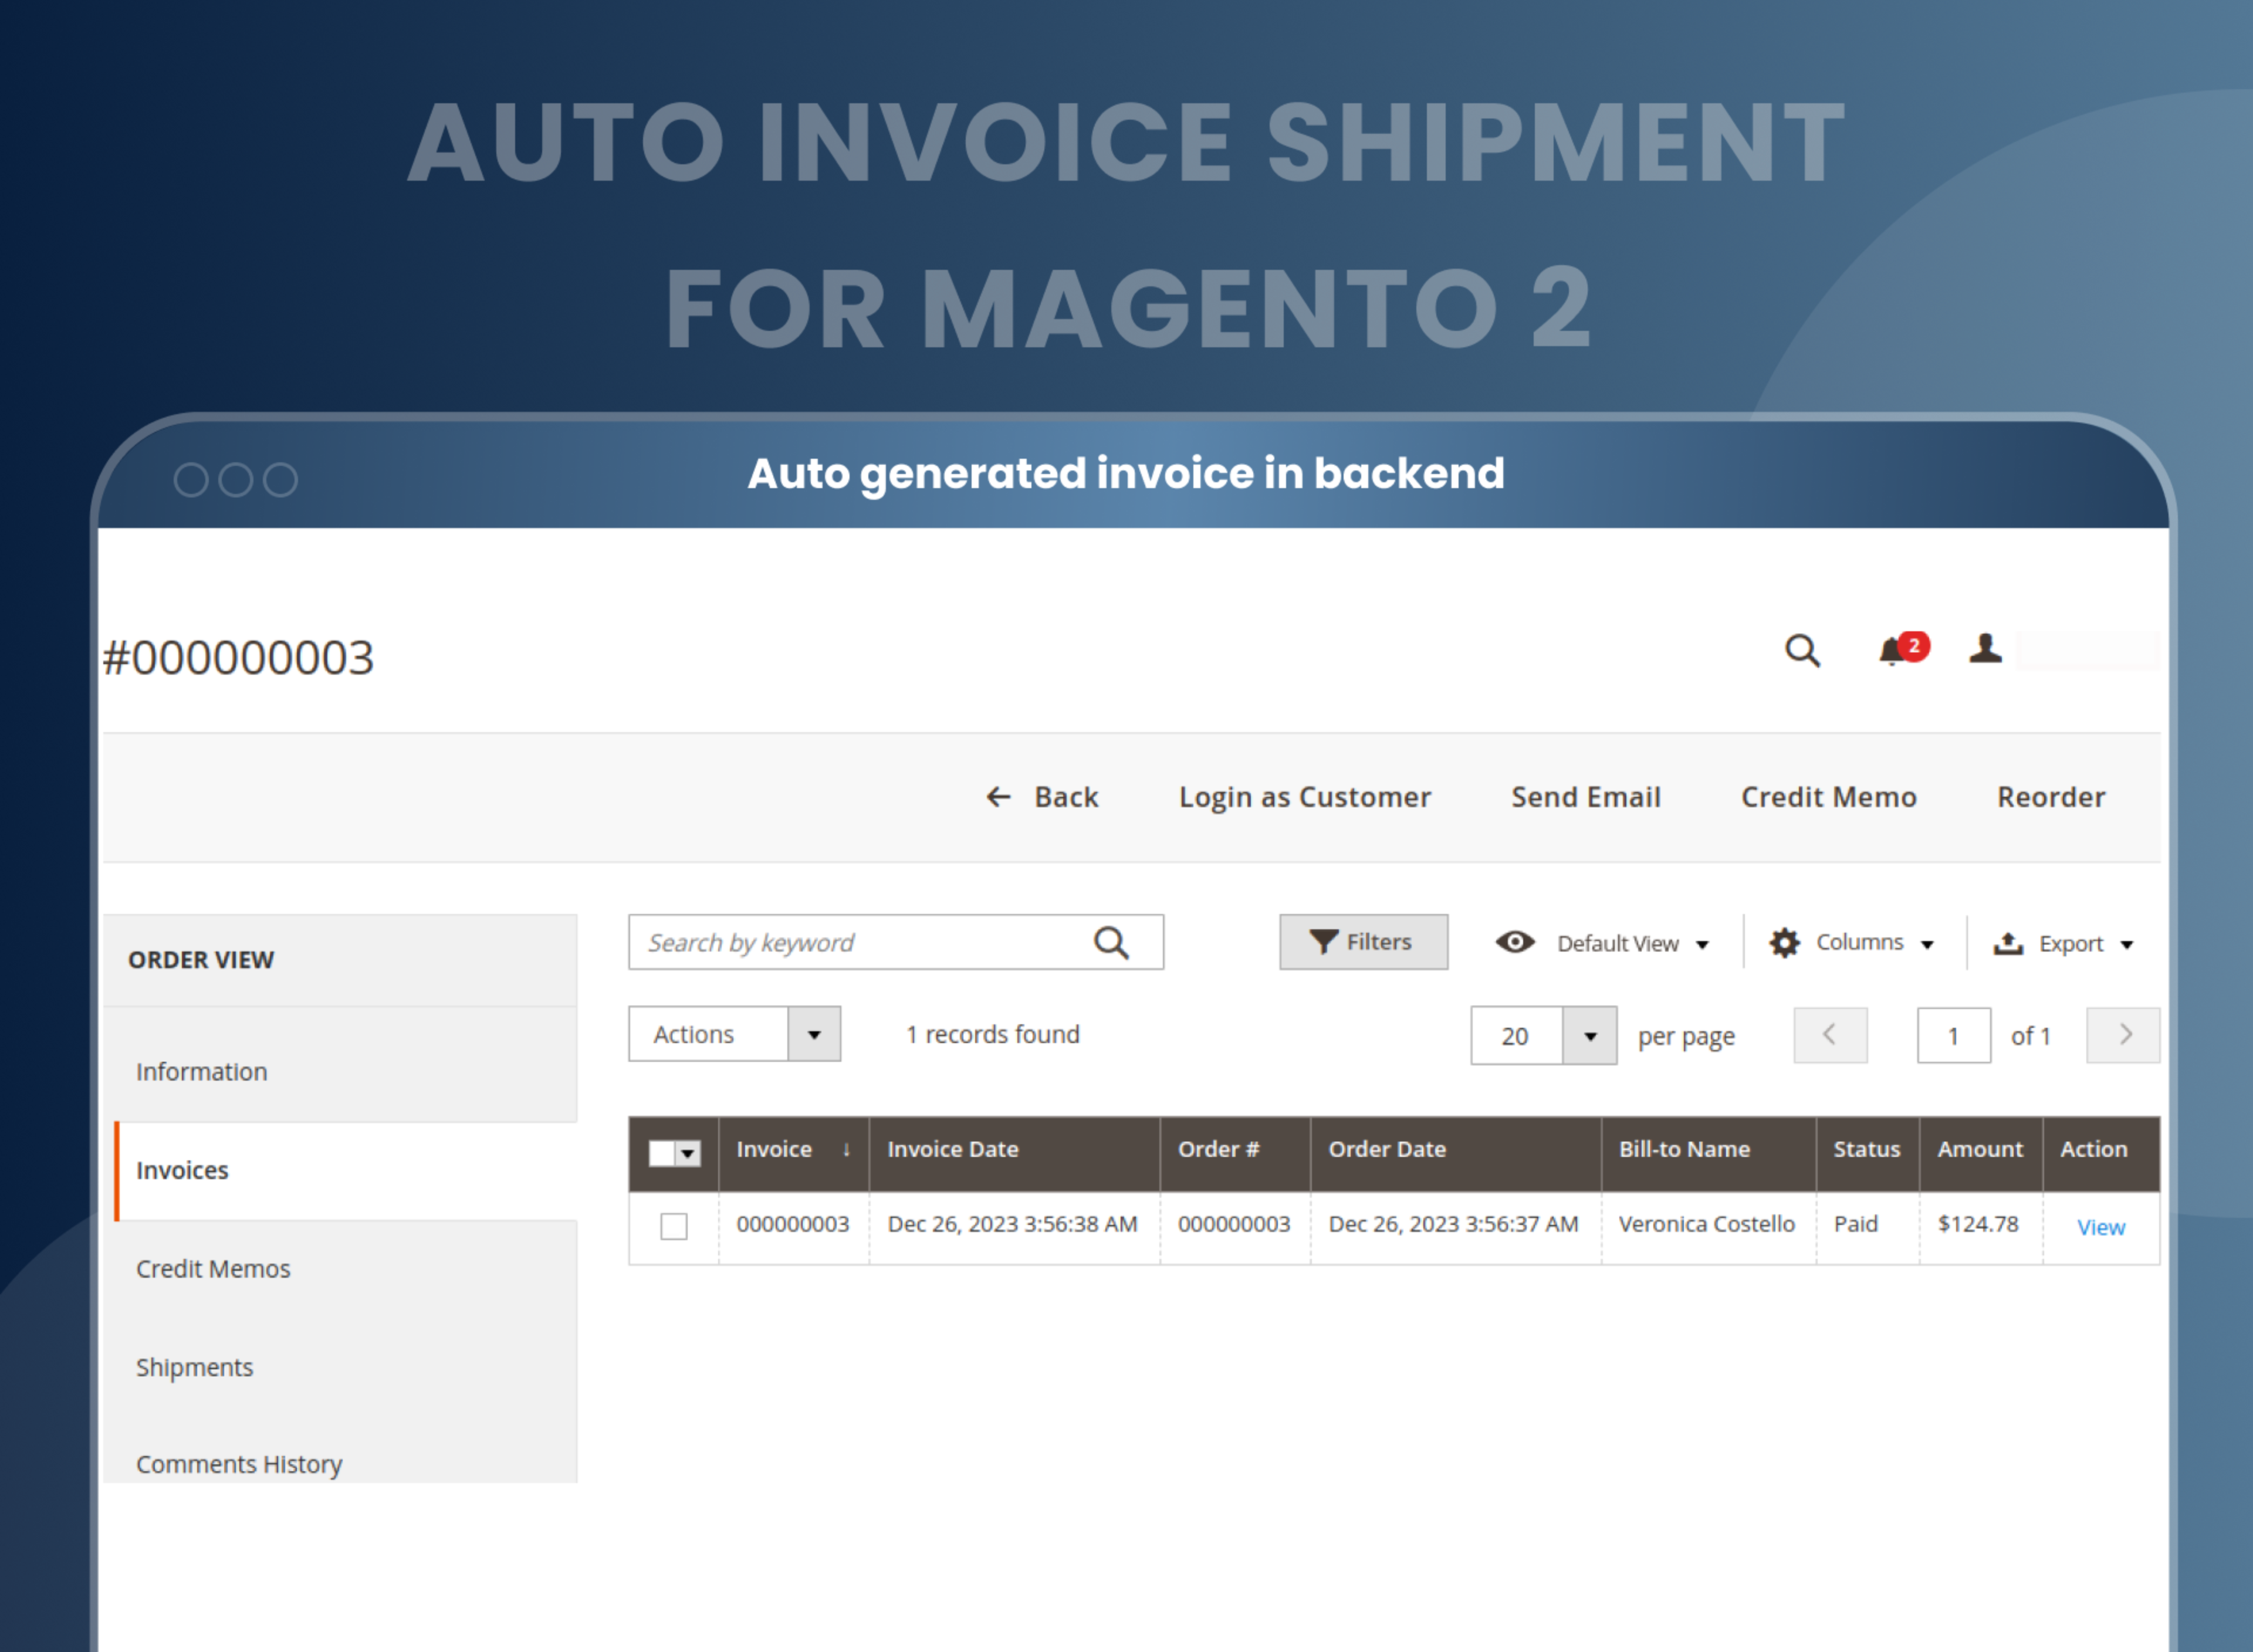 Auto generated invoice in backend 